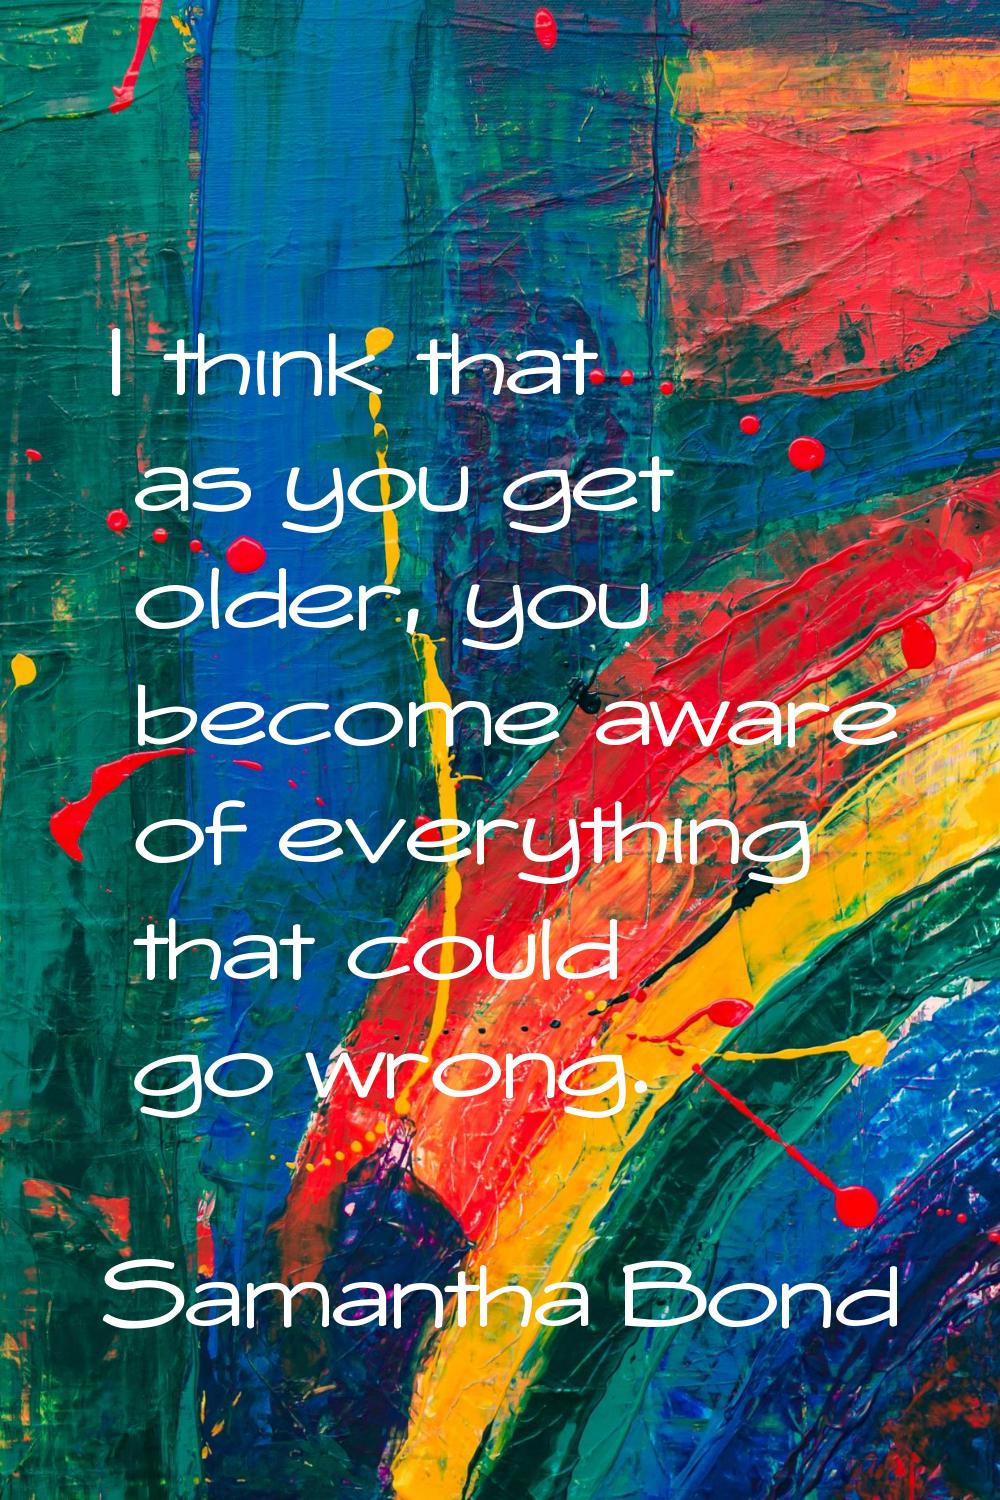 I think that as you get older, you become aware of everything that could go wrong.